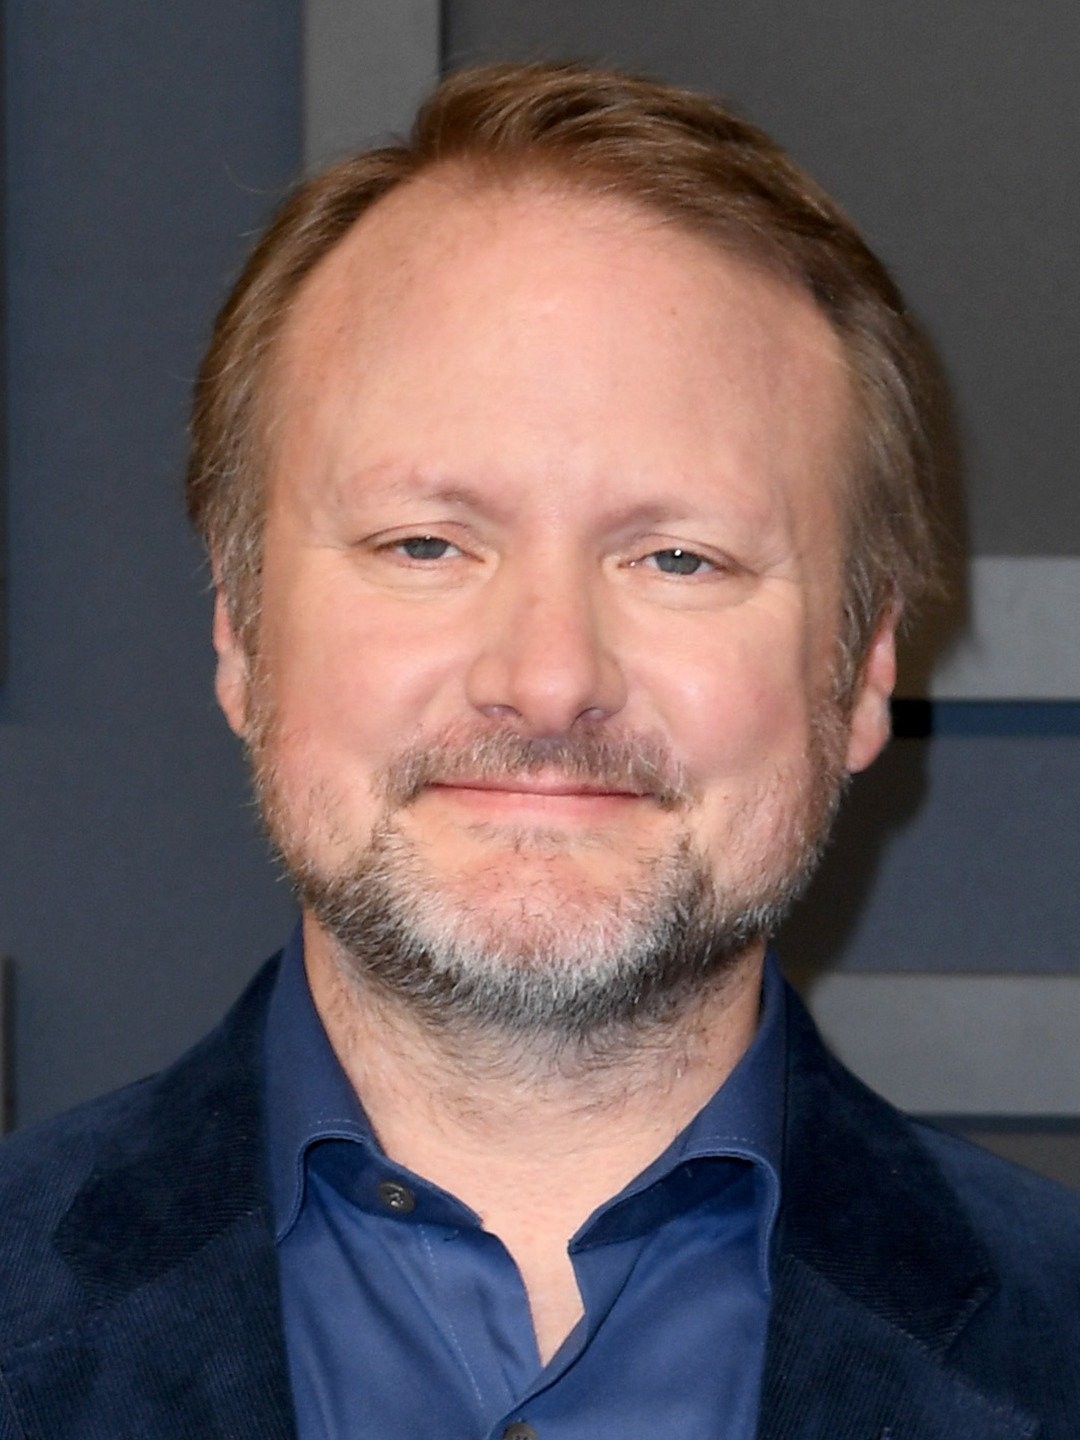 Rian Johnson Movies Ranked From Brick to Glass Onion